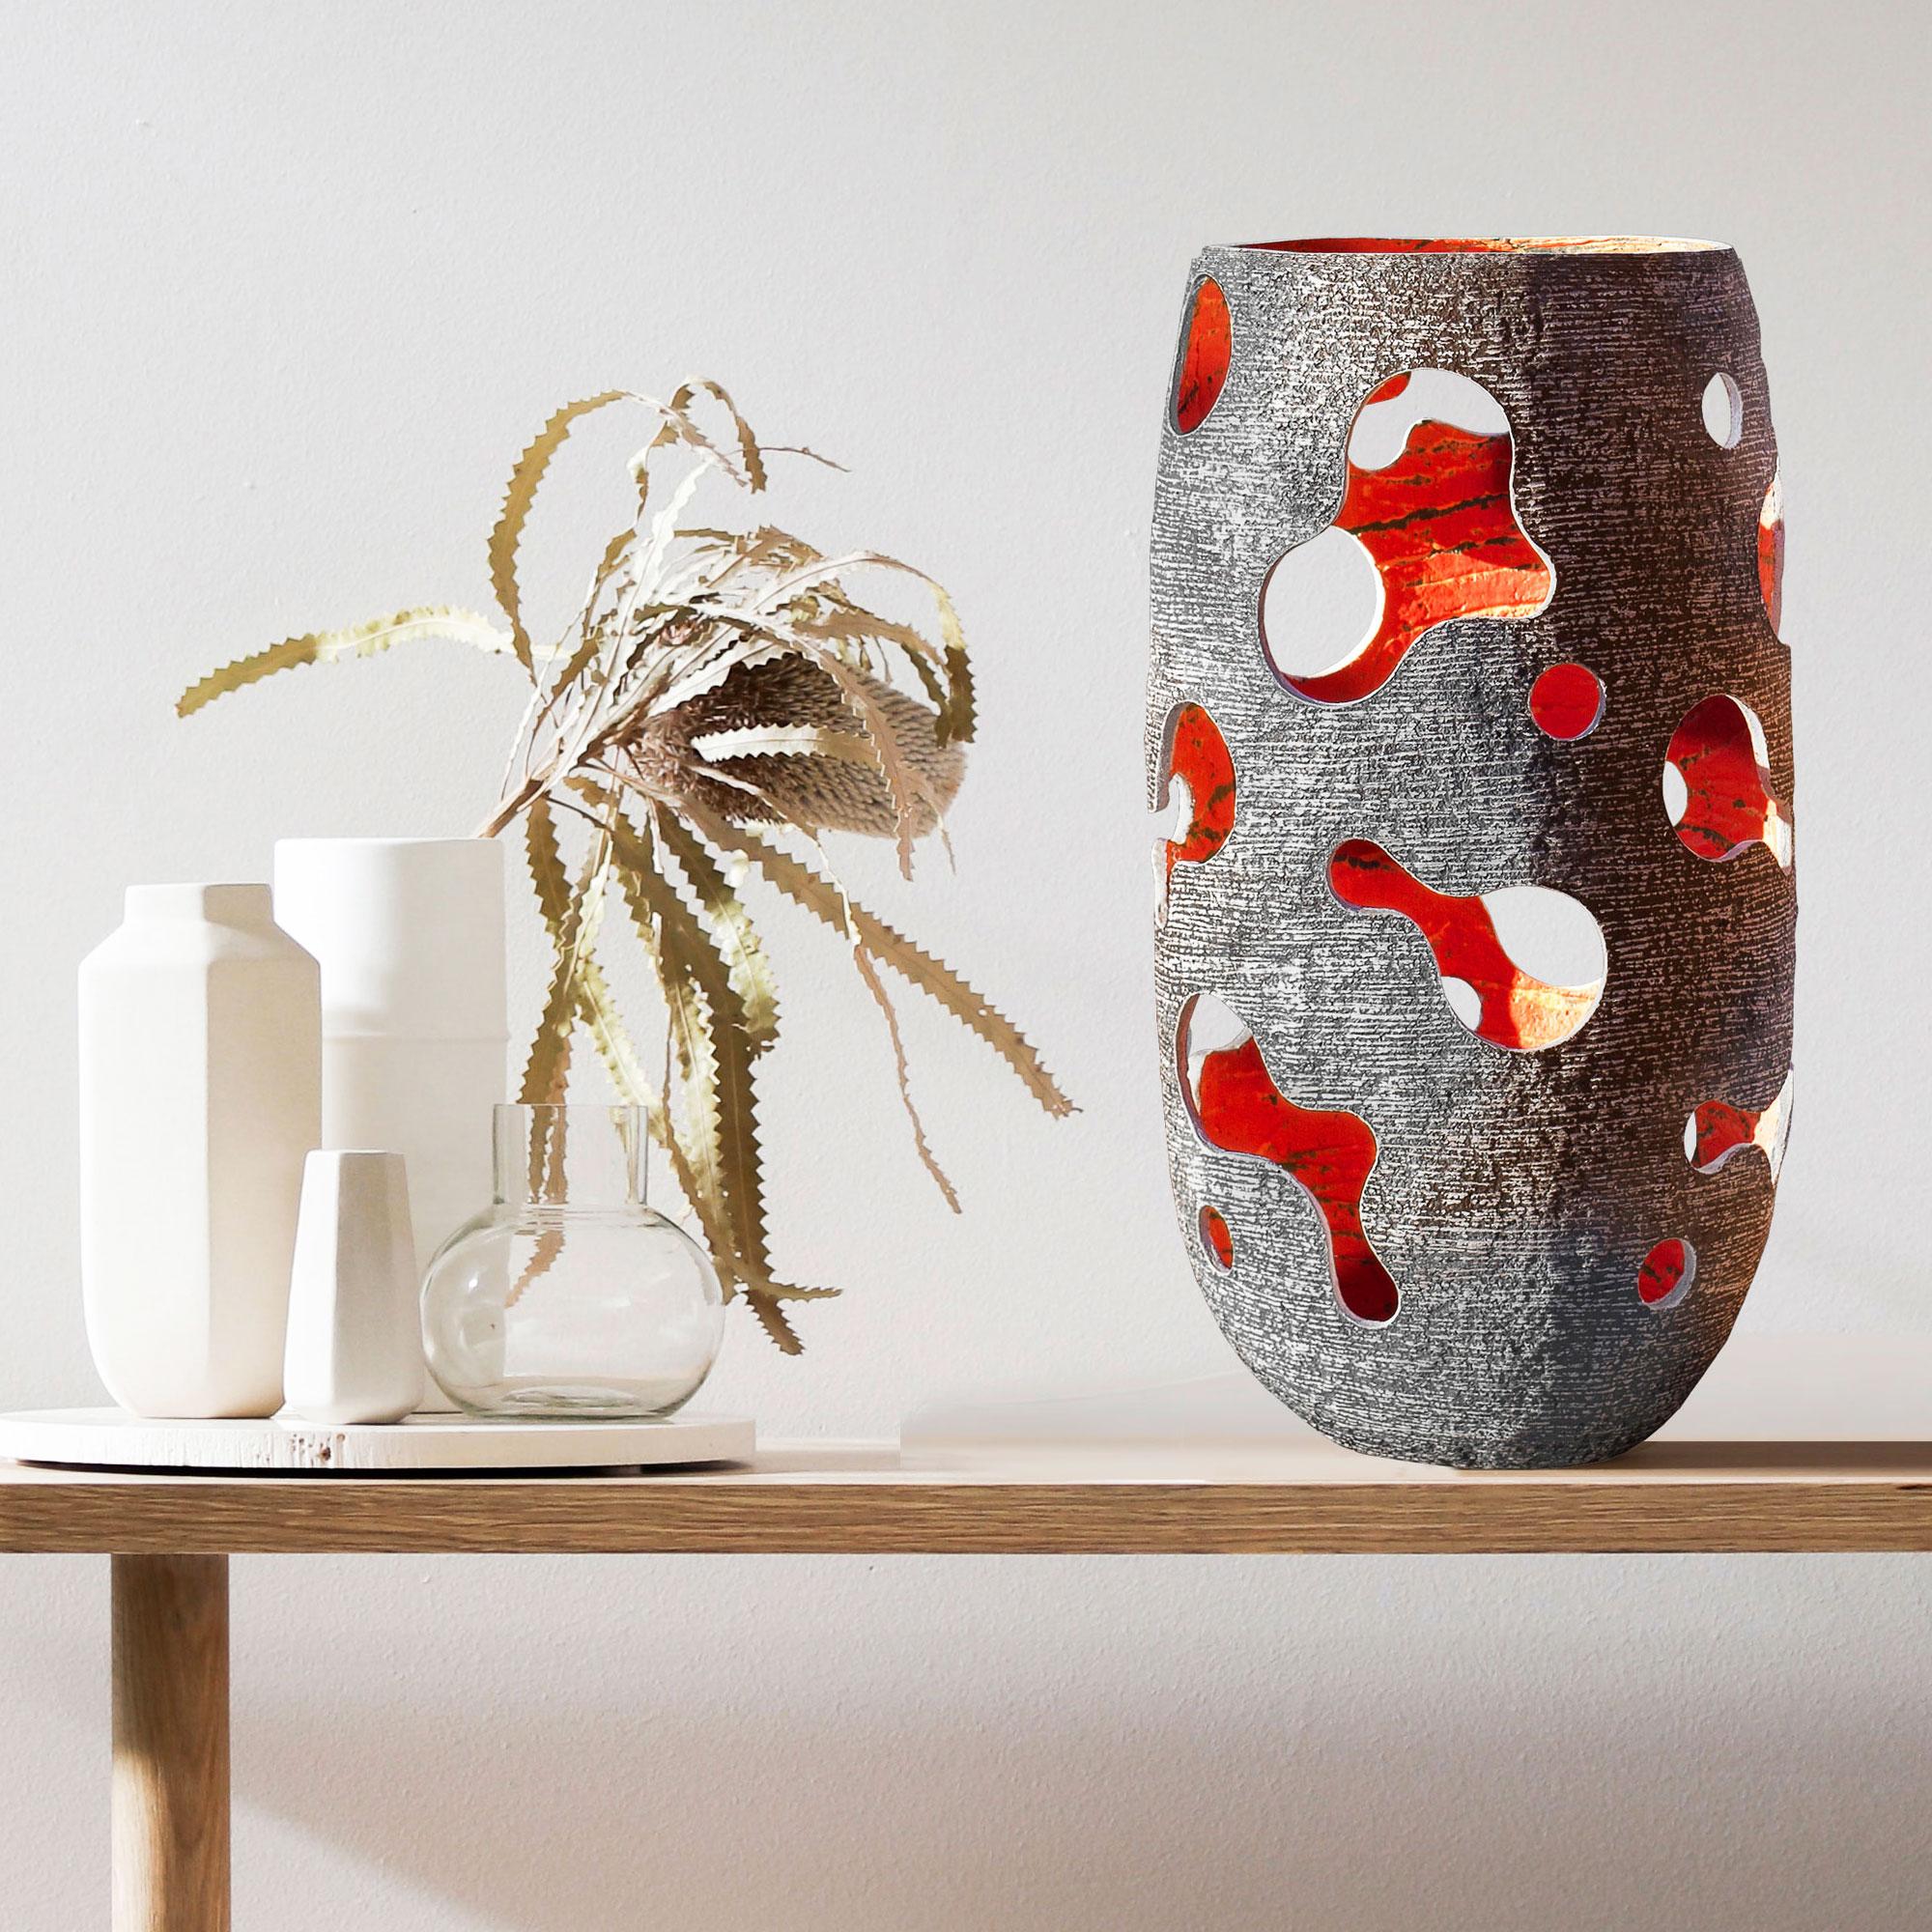 SCULPTURAL VASE, narrow candle lantern

Greatly nature-inspired with a touch of modernity - that is the essence of this collection. These candle lanterns are distinct for their versatility and multifunctionality. In day light when displayed